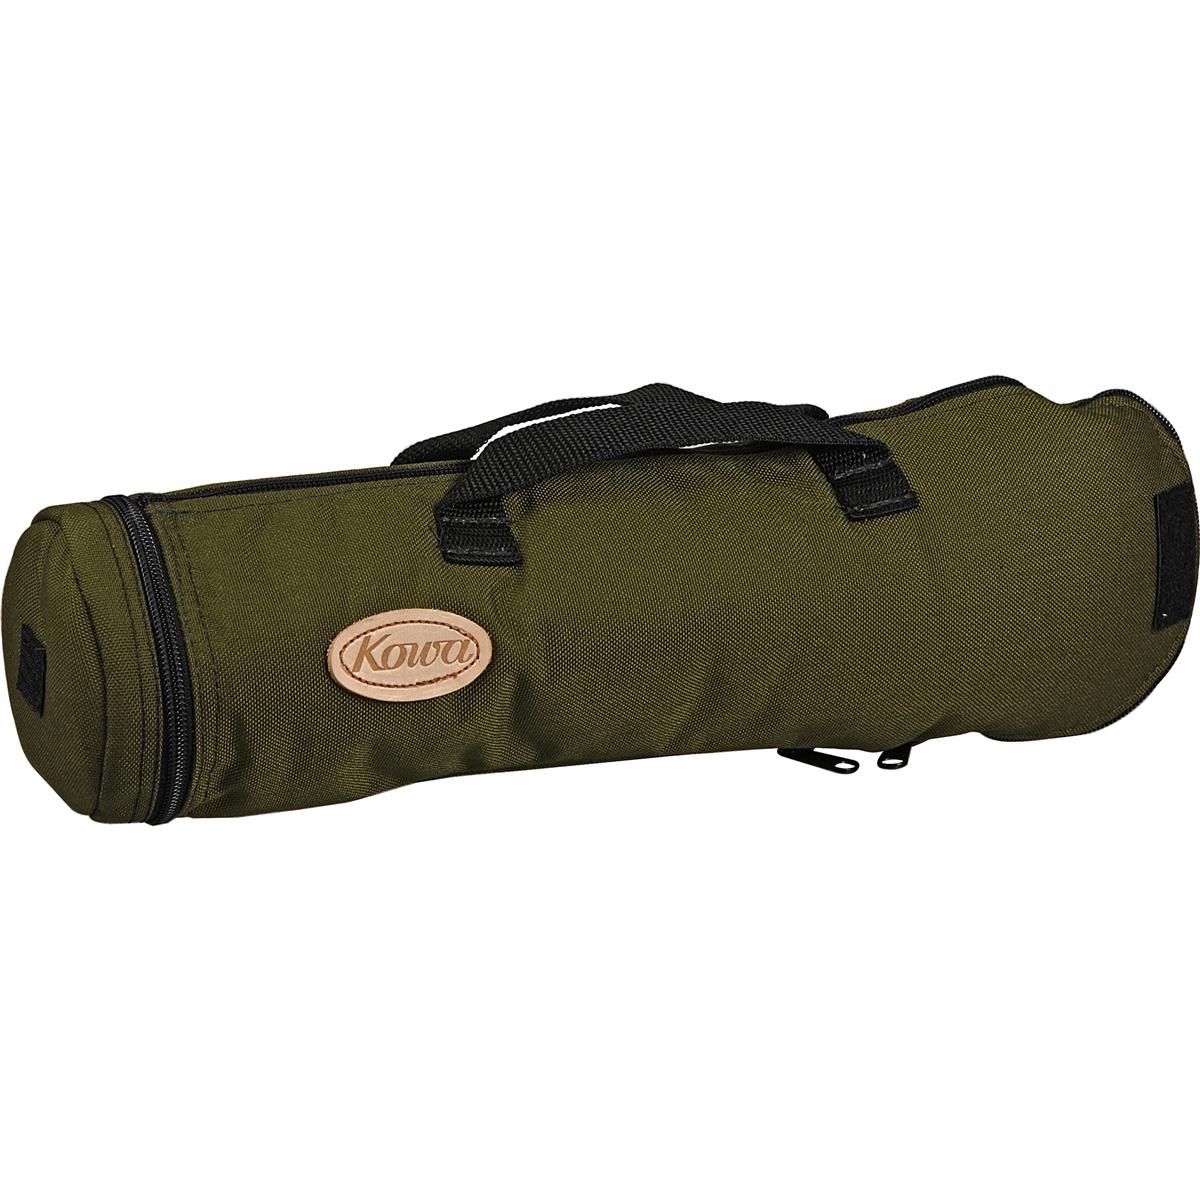 Image of Kowa Cordura Carrying Case for 66mm Straight Spotting Scopes